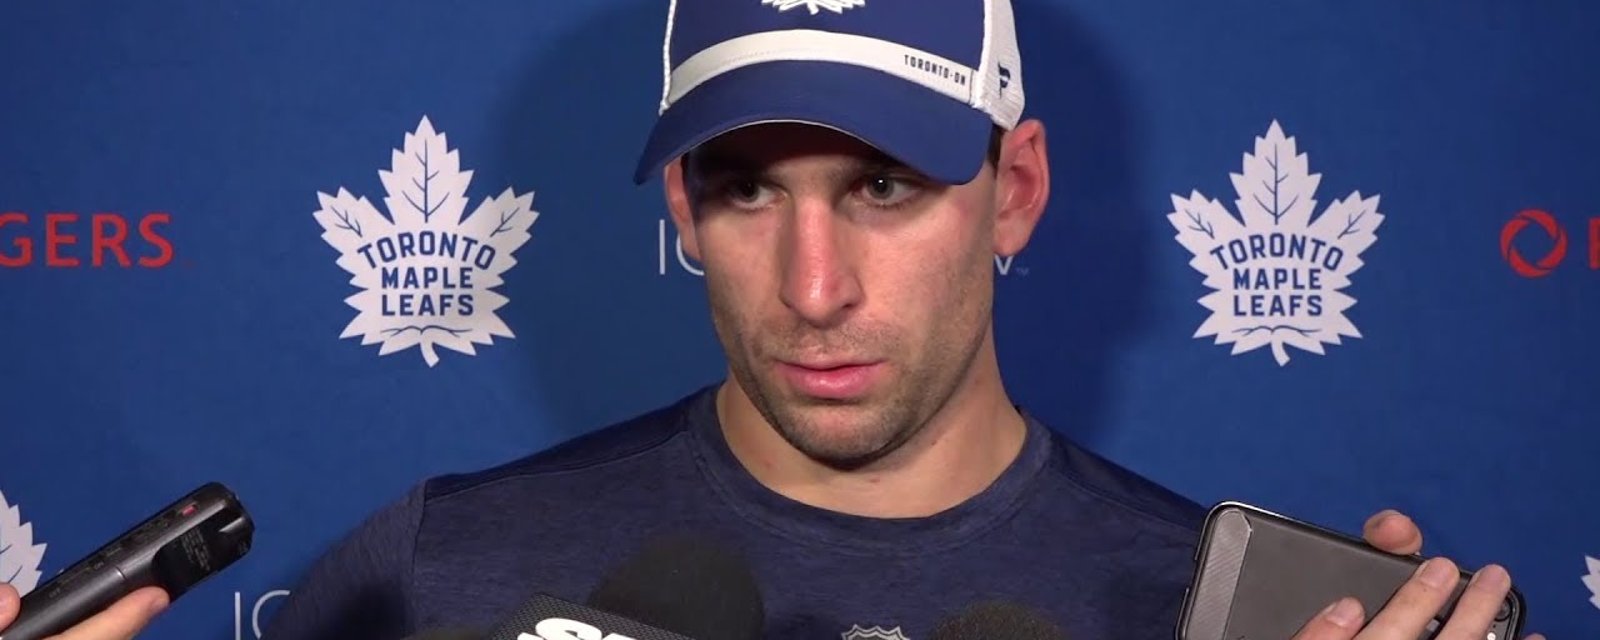 Tavares convinced the NHL to scold its officials! 